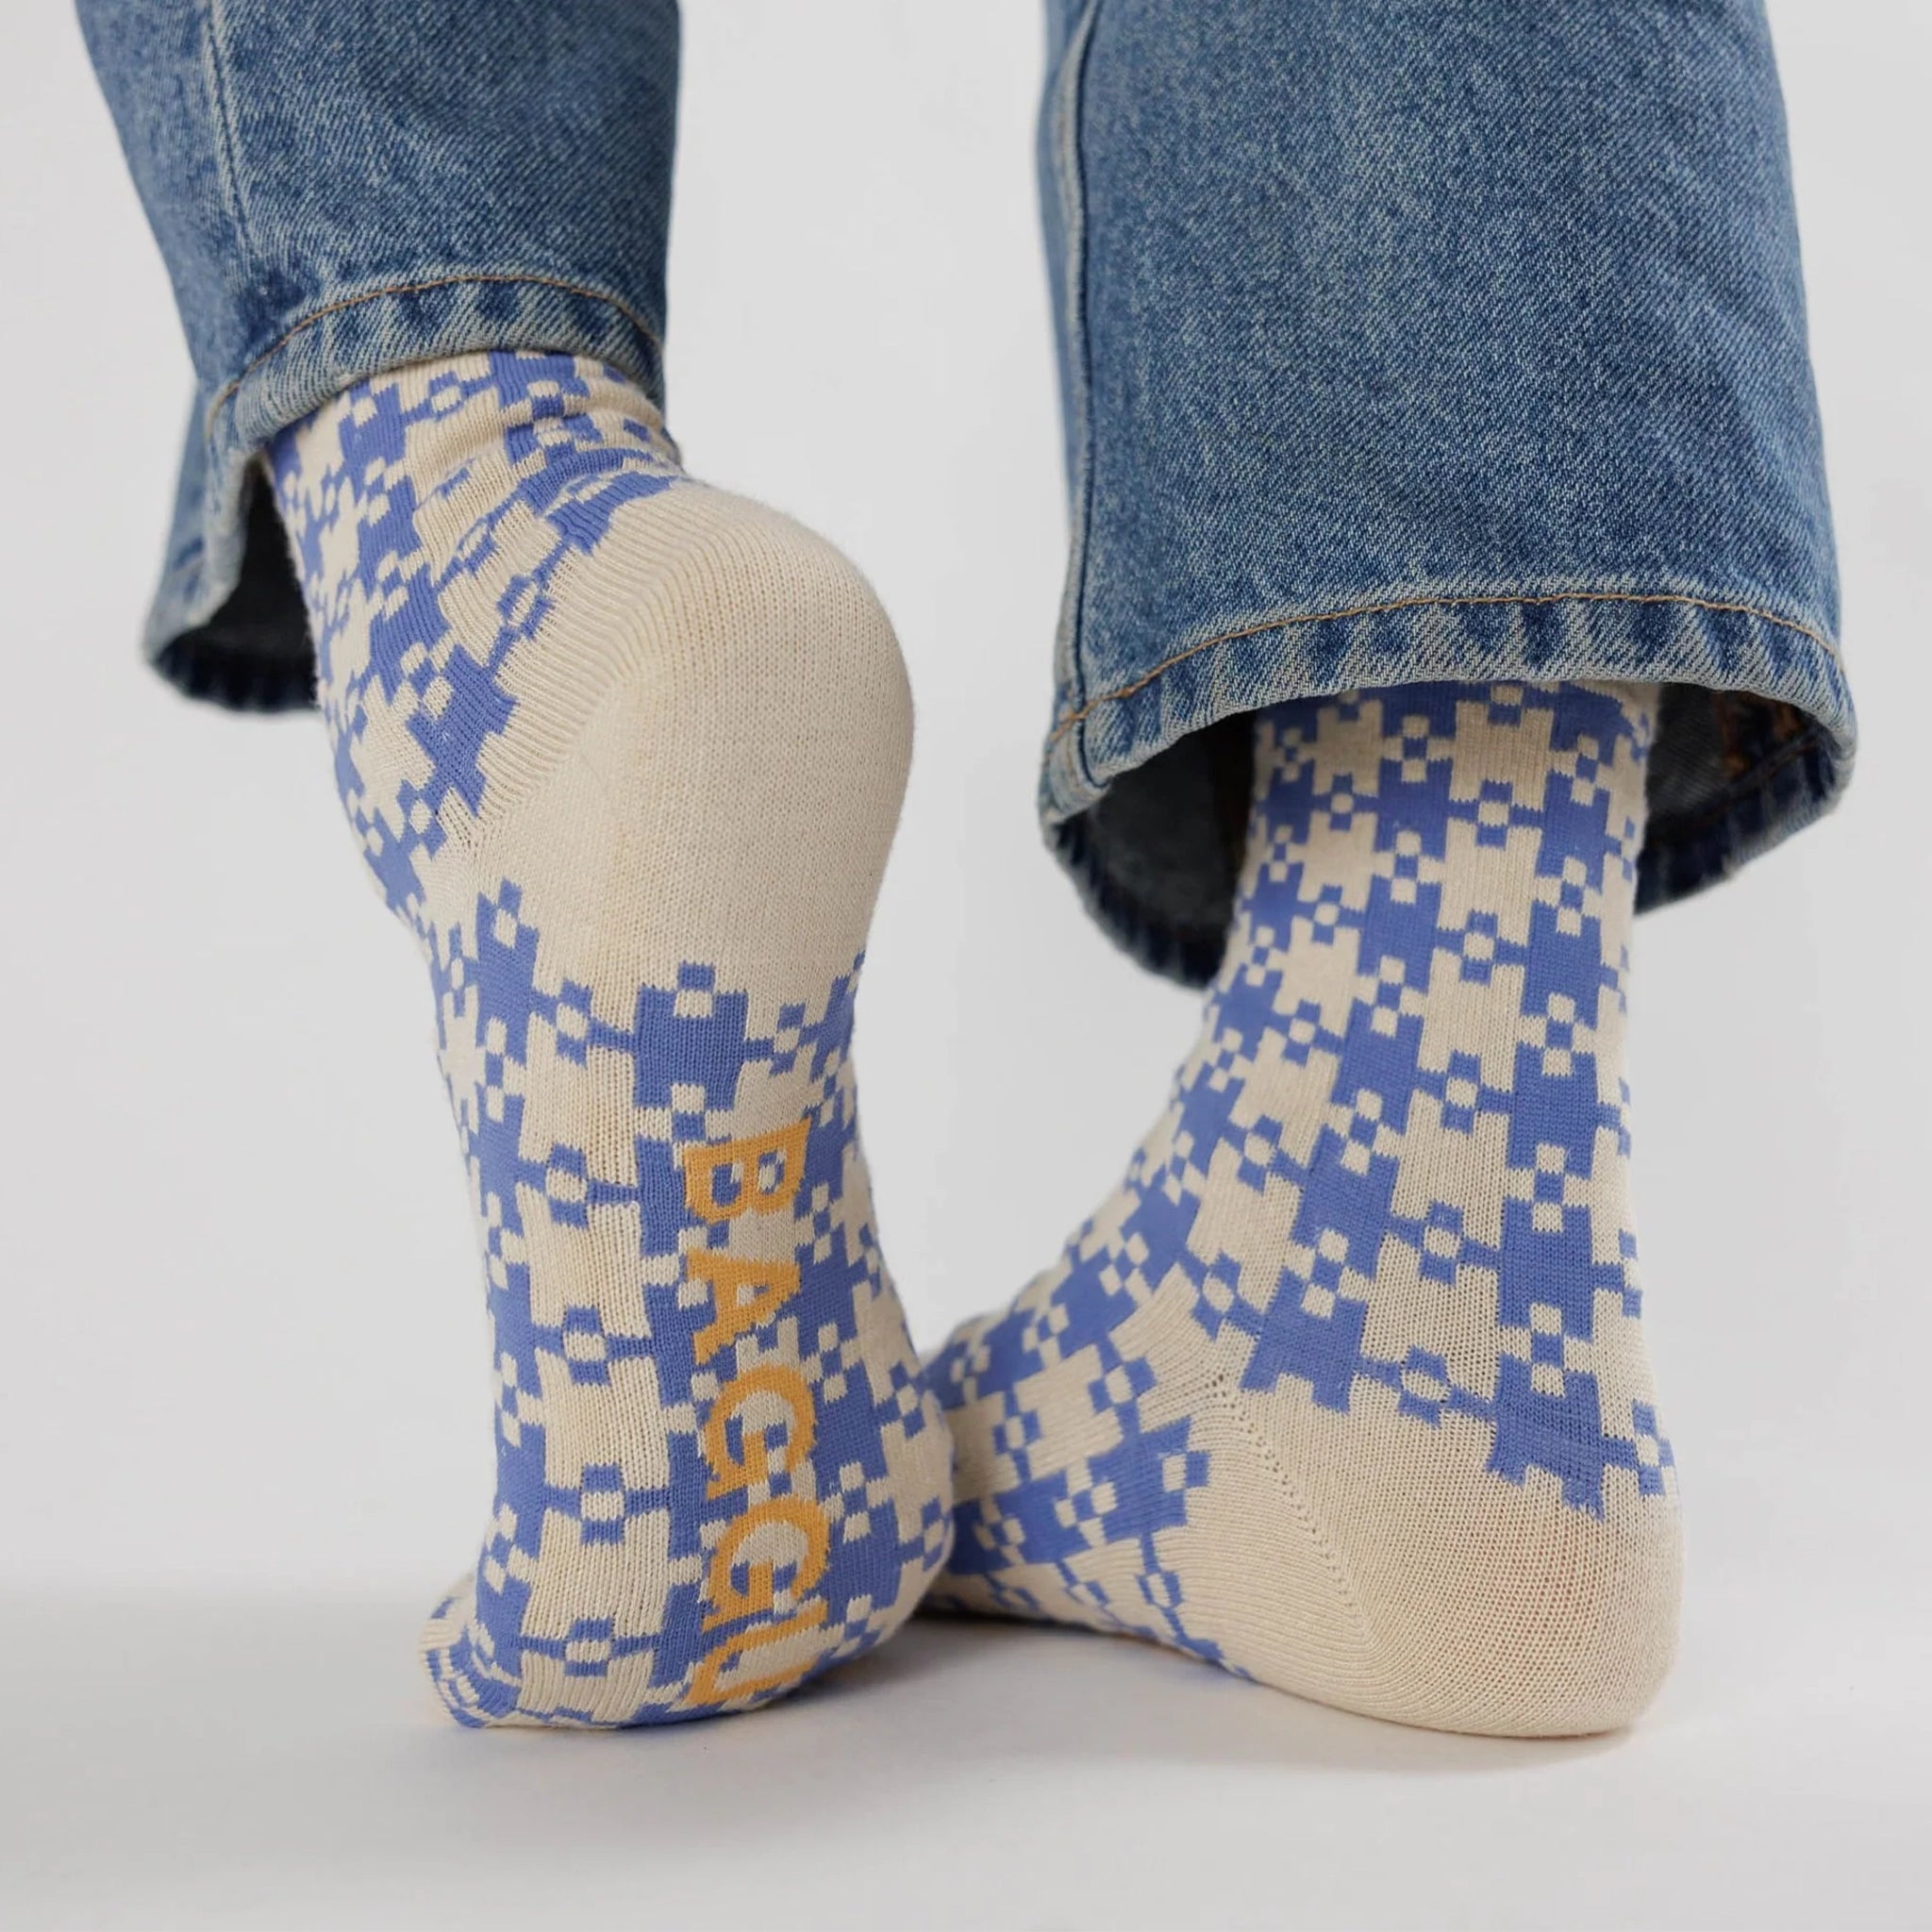 A pair of blue and ivory gingham printed crew socks